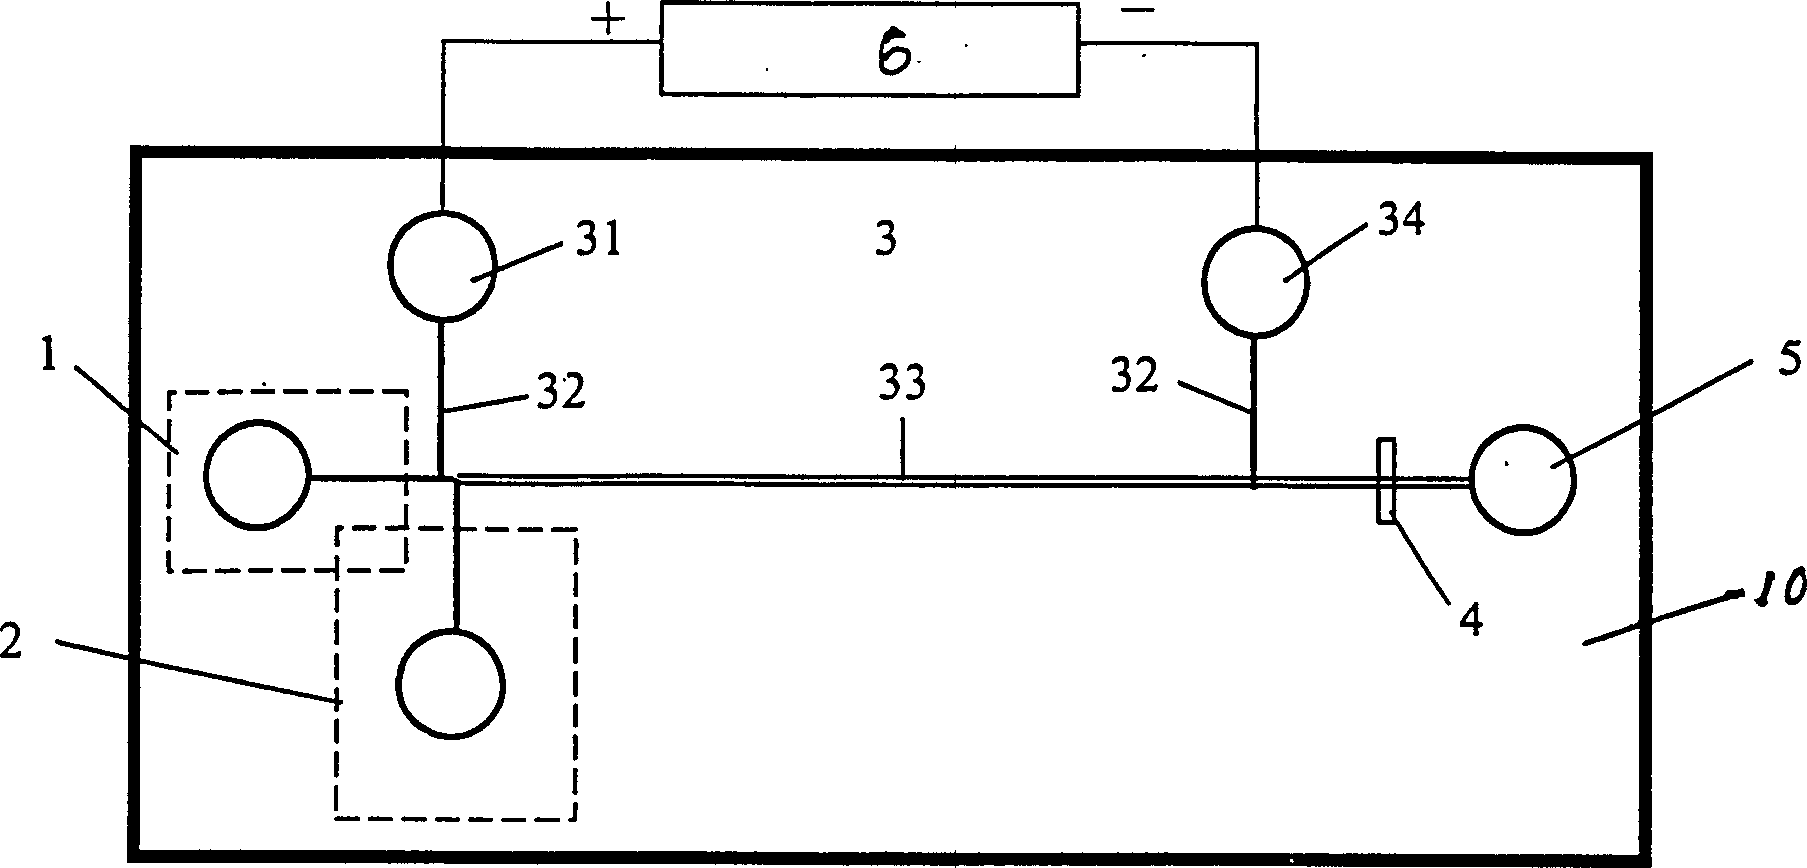 Simple two-step isoelectric focusing separation analytic device